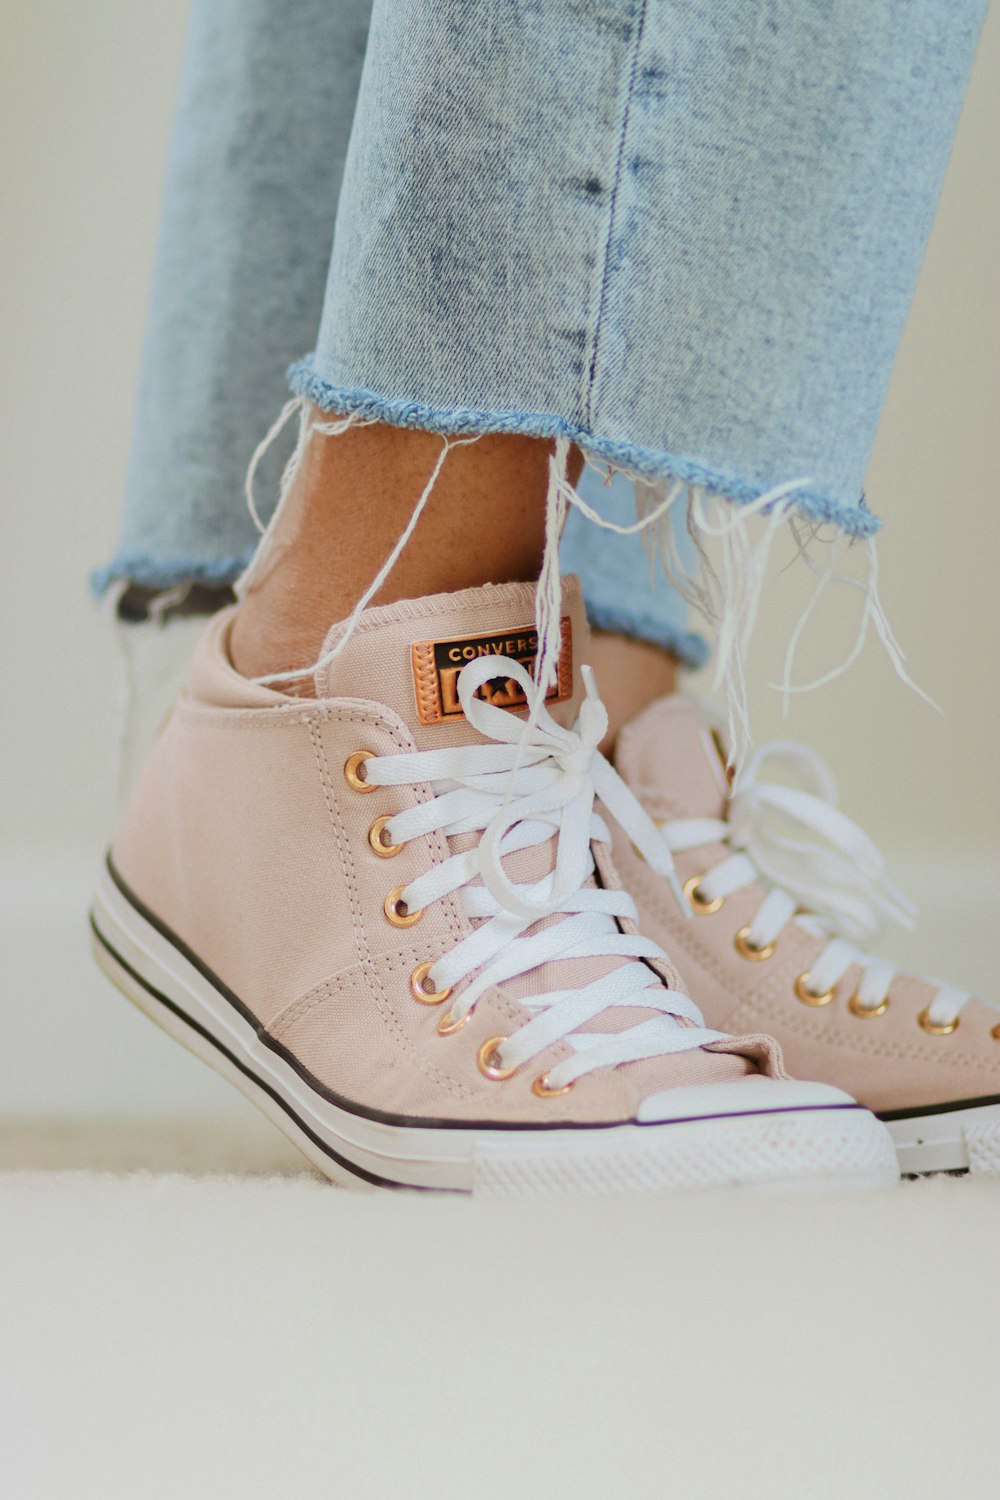 a close up of a person wearing pink sneakers